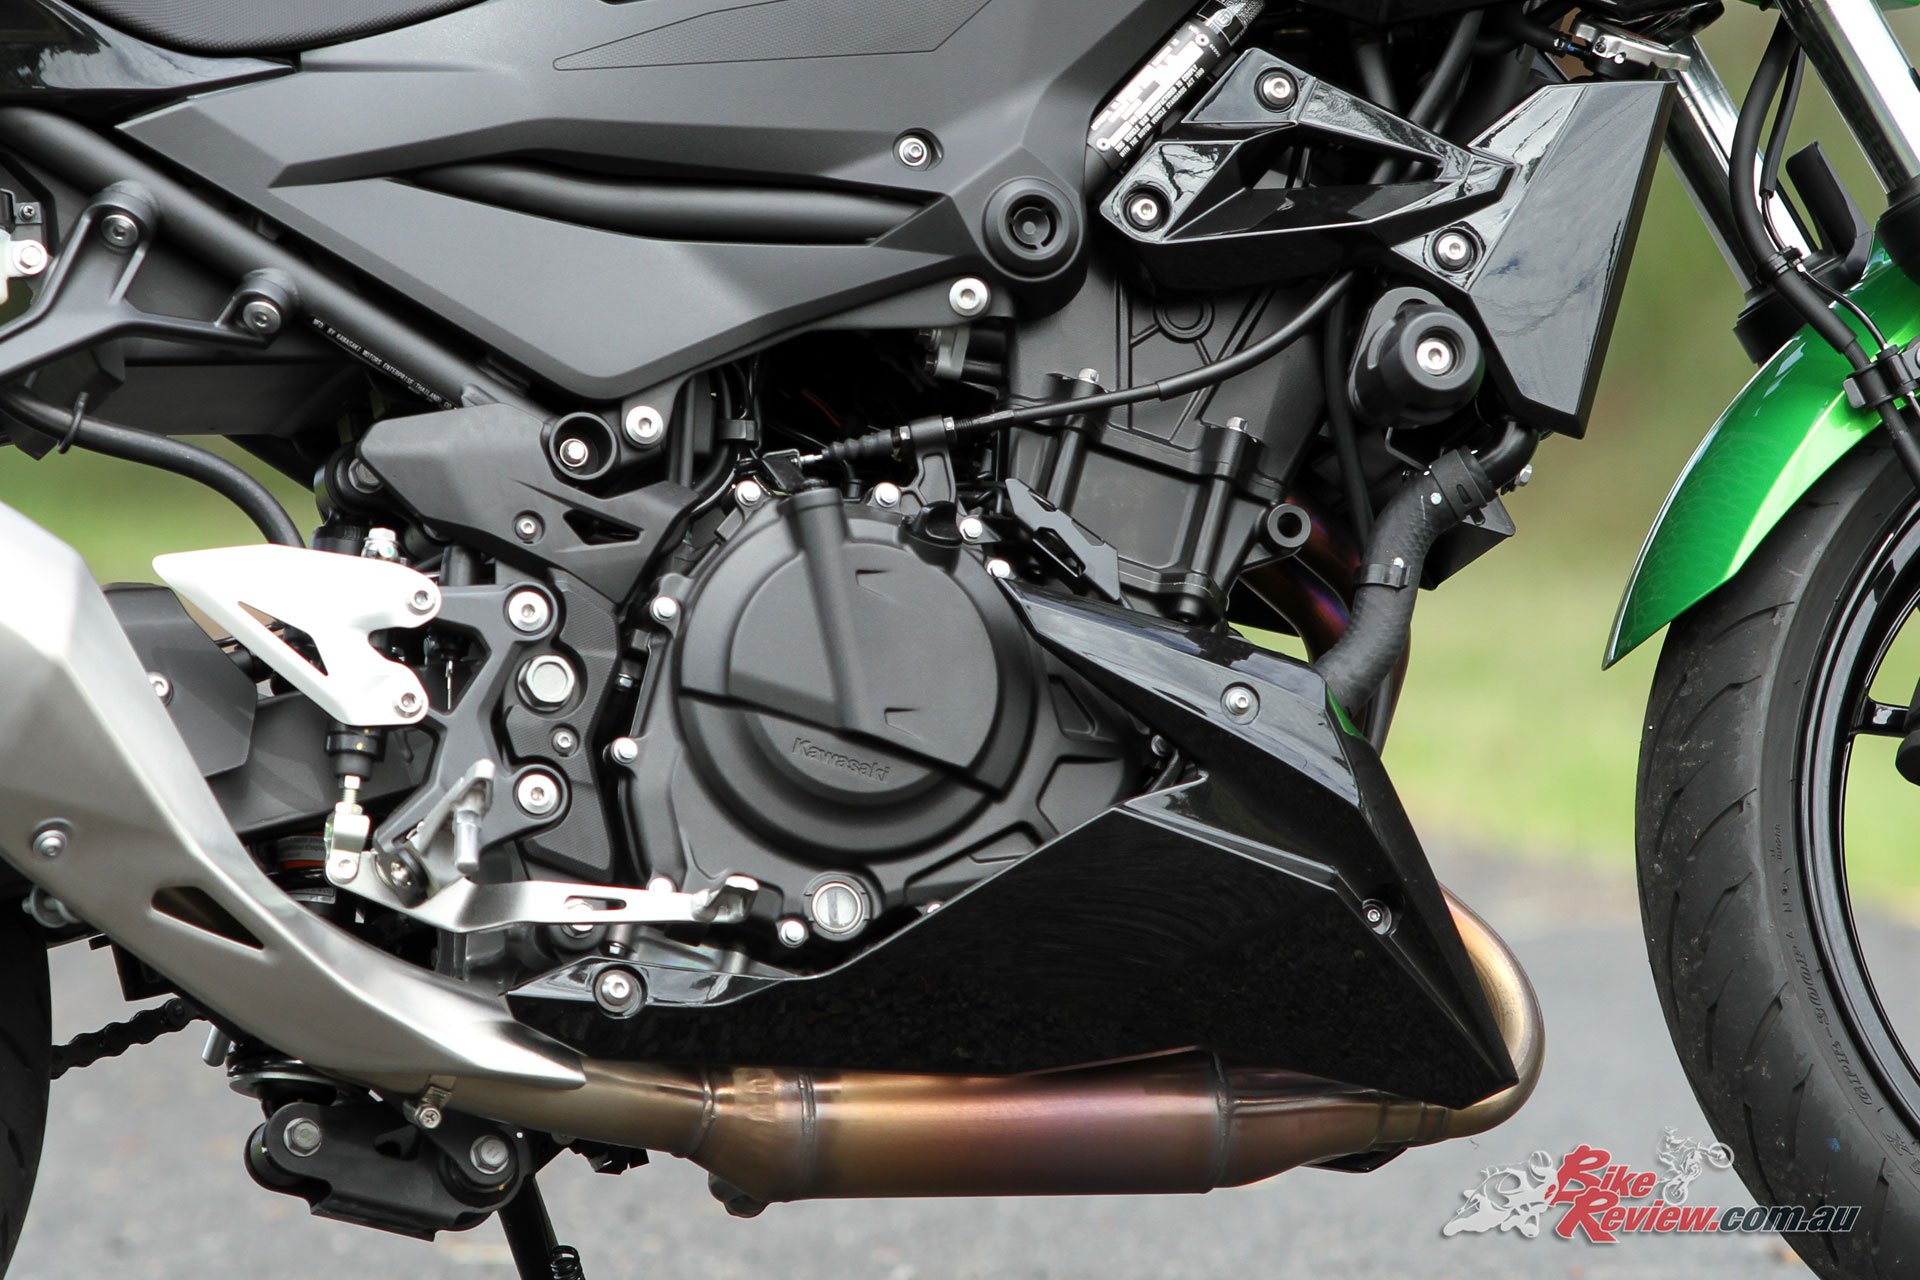 The 399cc parallel twin is a real gem, offering performance akin to a 600-650cc LAMS machine